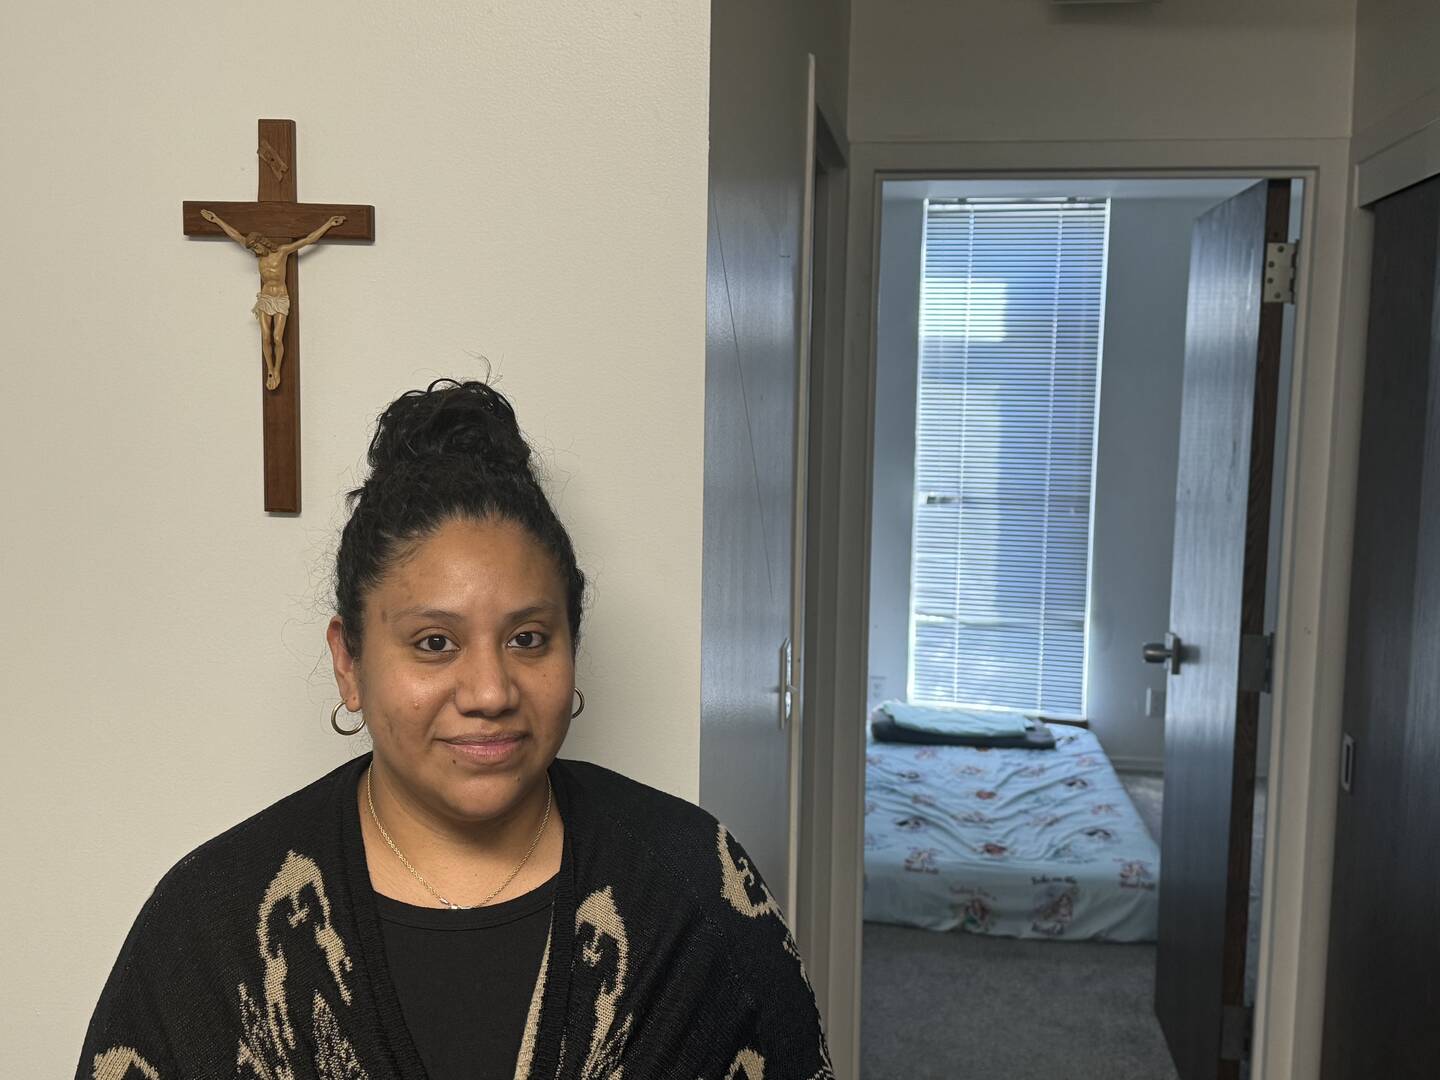 After the Church of St. Joseph the Worker in Pittsburgh closed, the parish offered free use of the rectory to Casa San Jose, a group that helps immigrants (photo: John W. Miller).